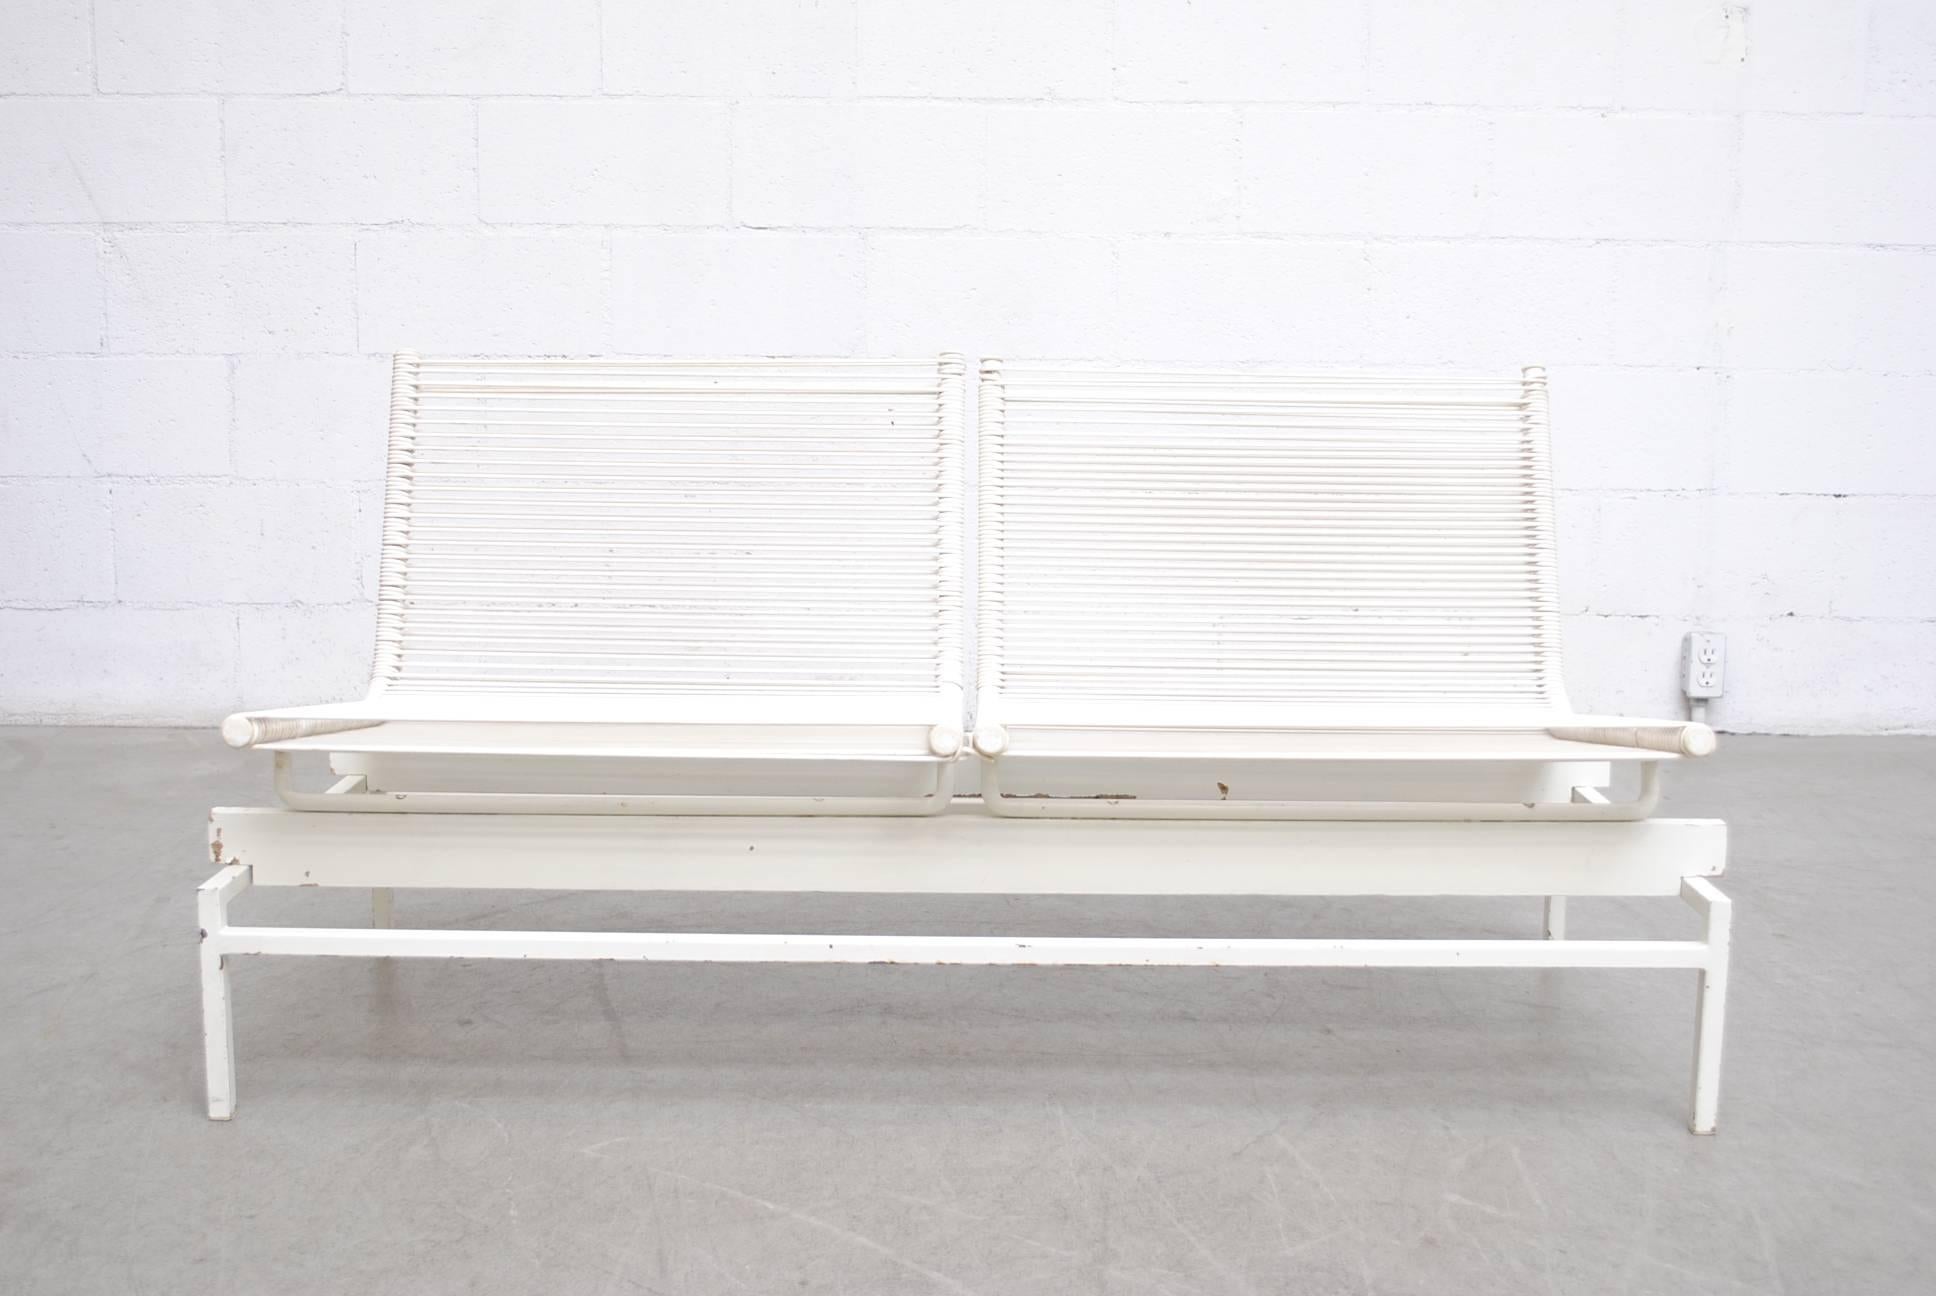 Two-seat bench with white enameled metal frame and string seating. Some paint and enamel loss, visible wear consistent with its age and usage.